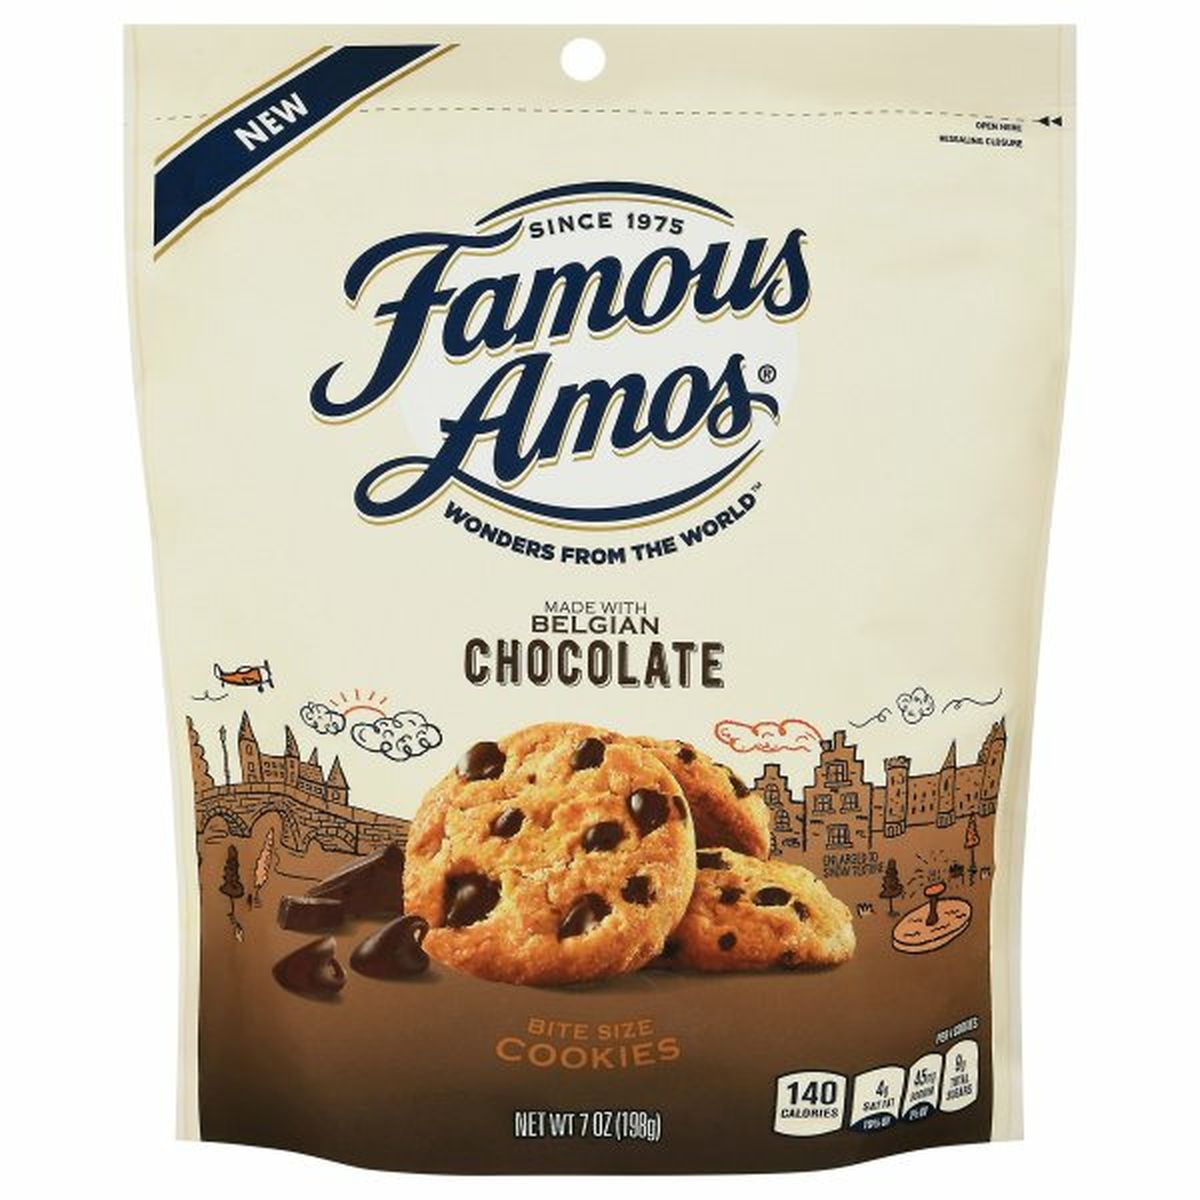 Calories in Famous Amos Cookies, Belgian Chocolate, Bite Size